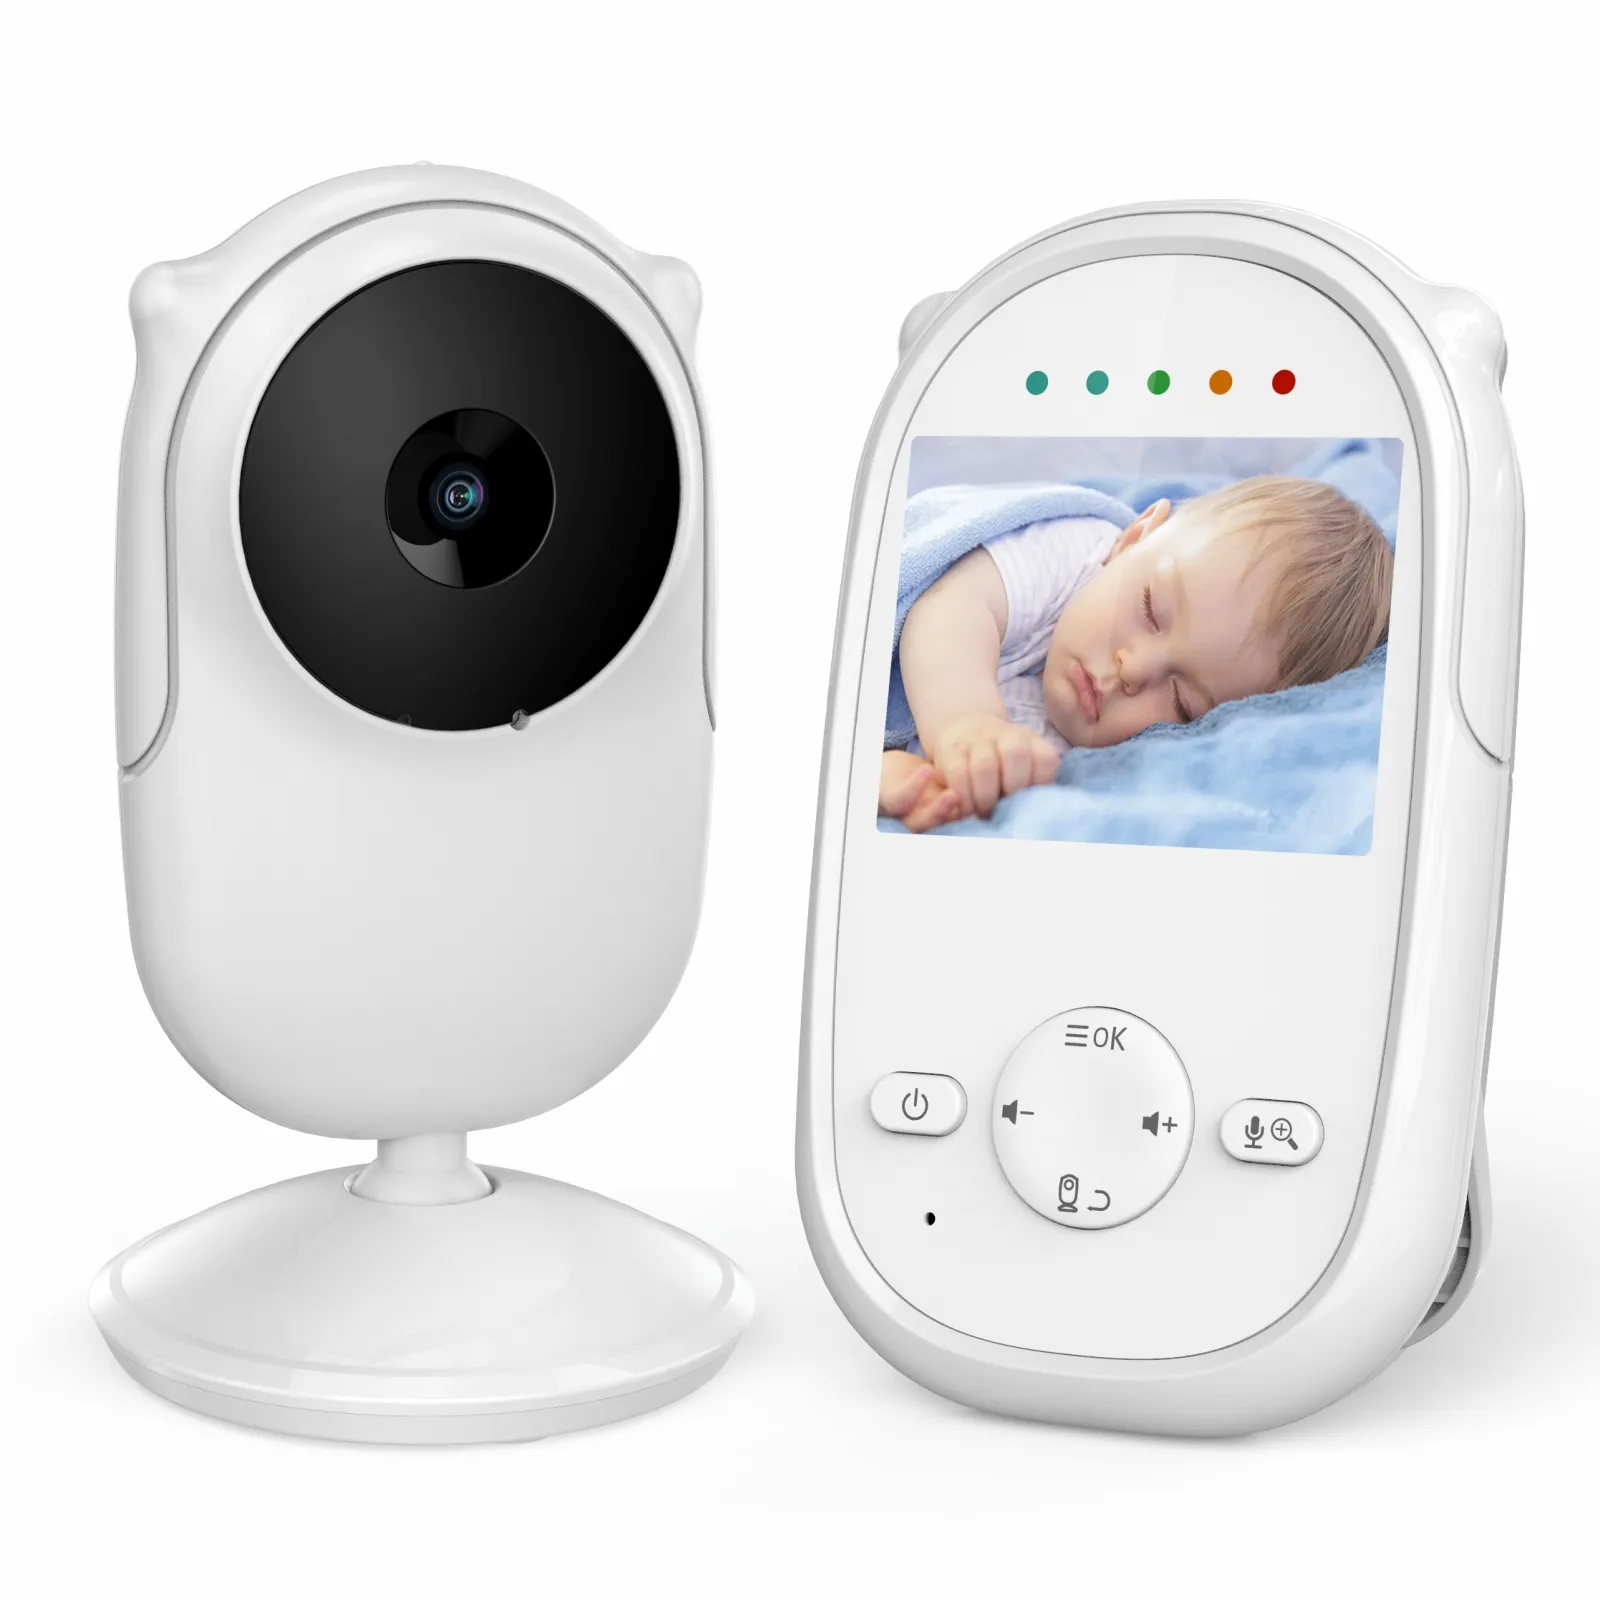 Custom baby monitor wireless baby care device with camera, night vision lullaby factory wholesale Amazon explosion model